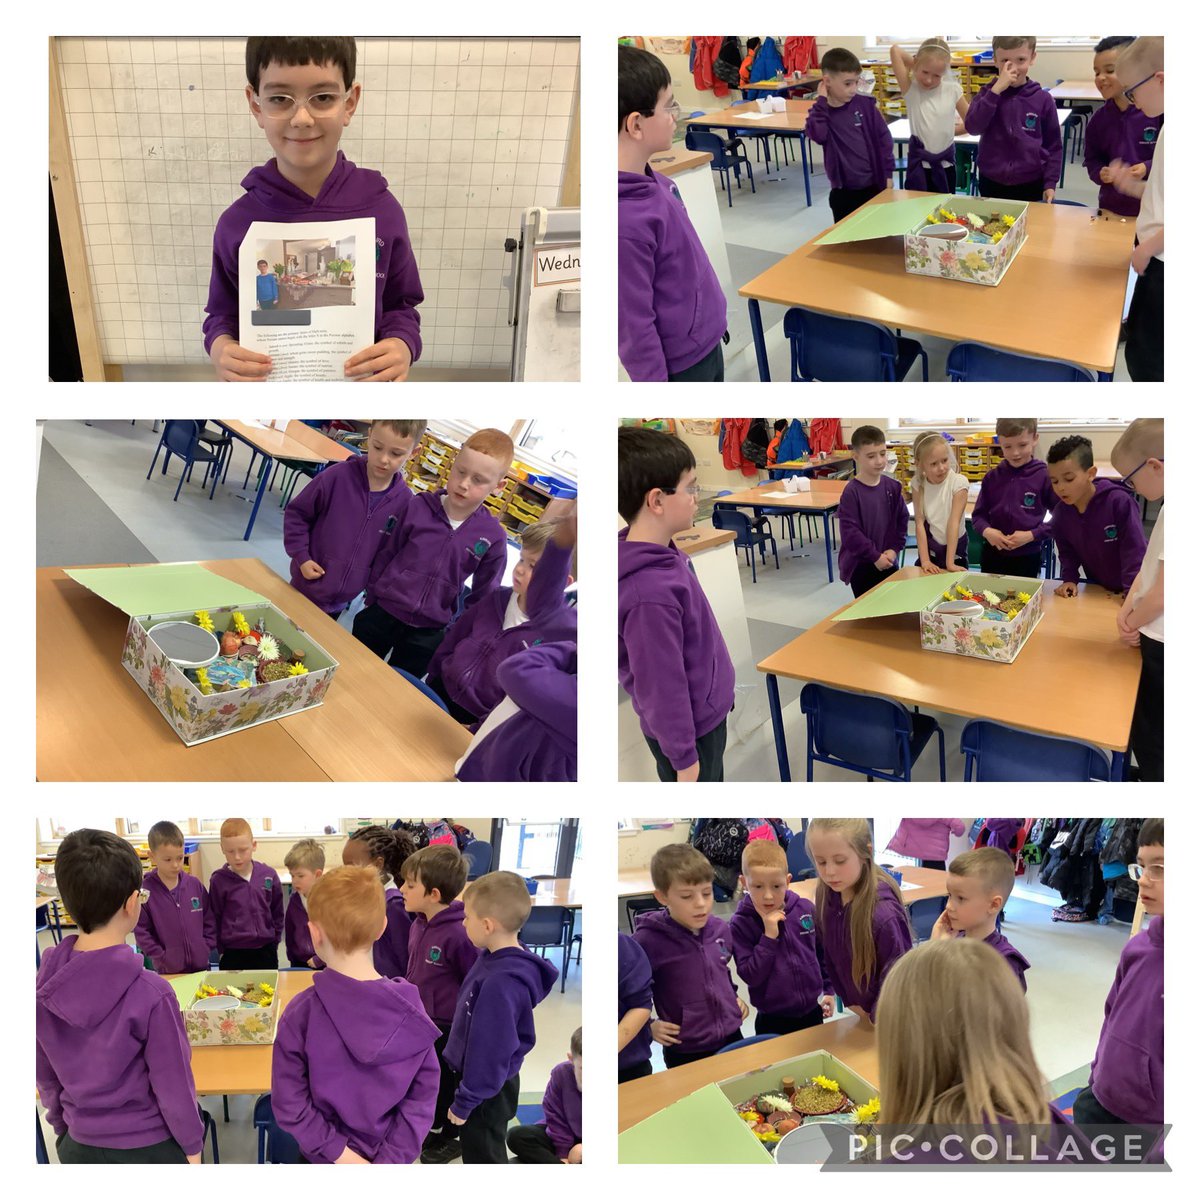 Thank you to S for talking to us about Nowruz the Iranian New Year. We really enjoyed looking at all of the symbolic items you brought in too and finding out what they represent. 😀